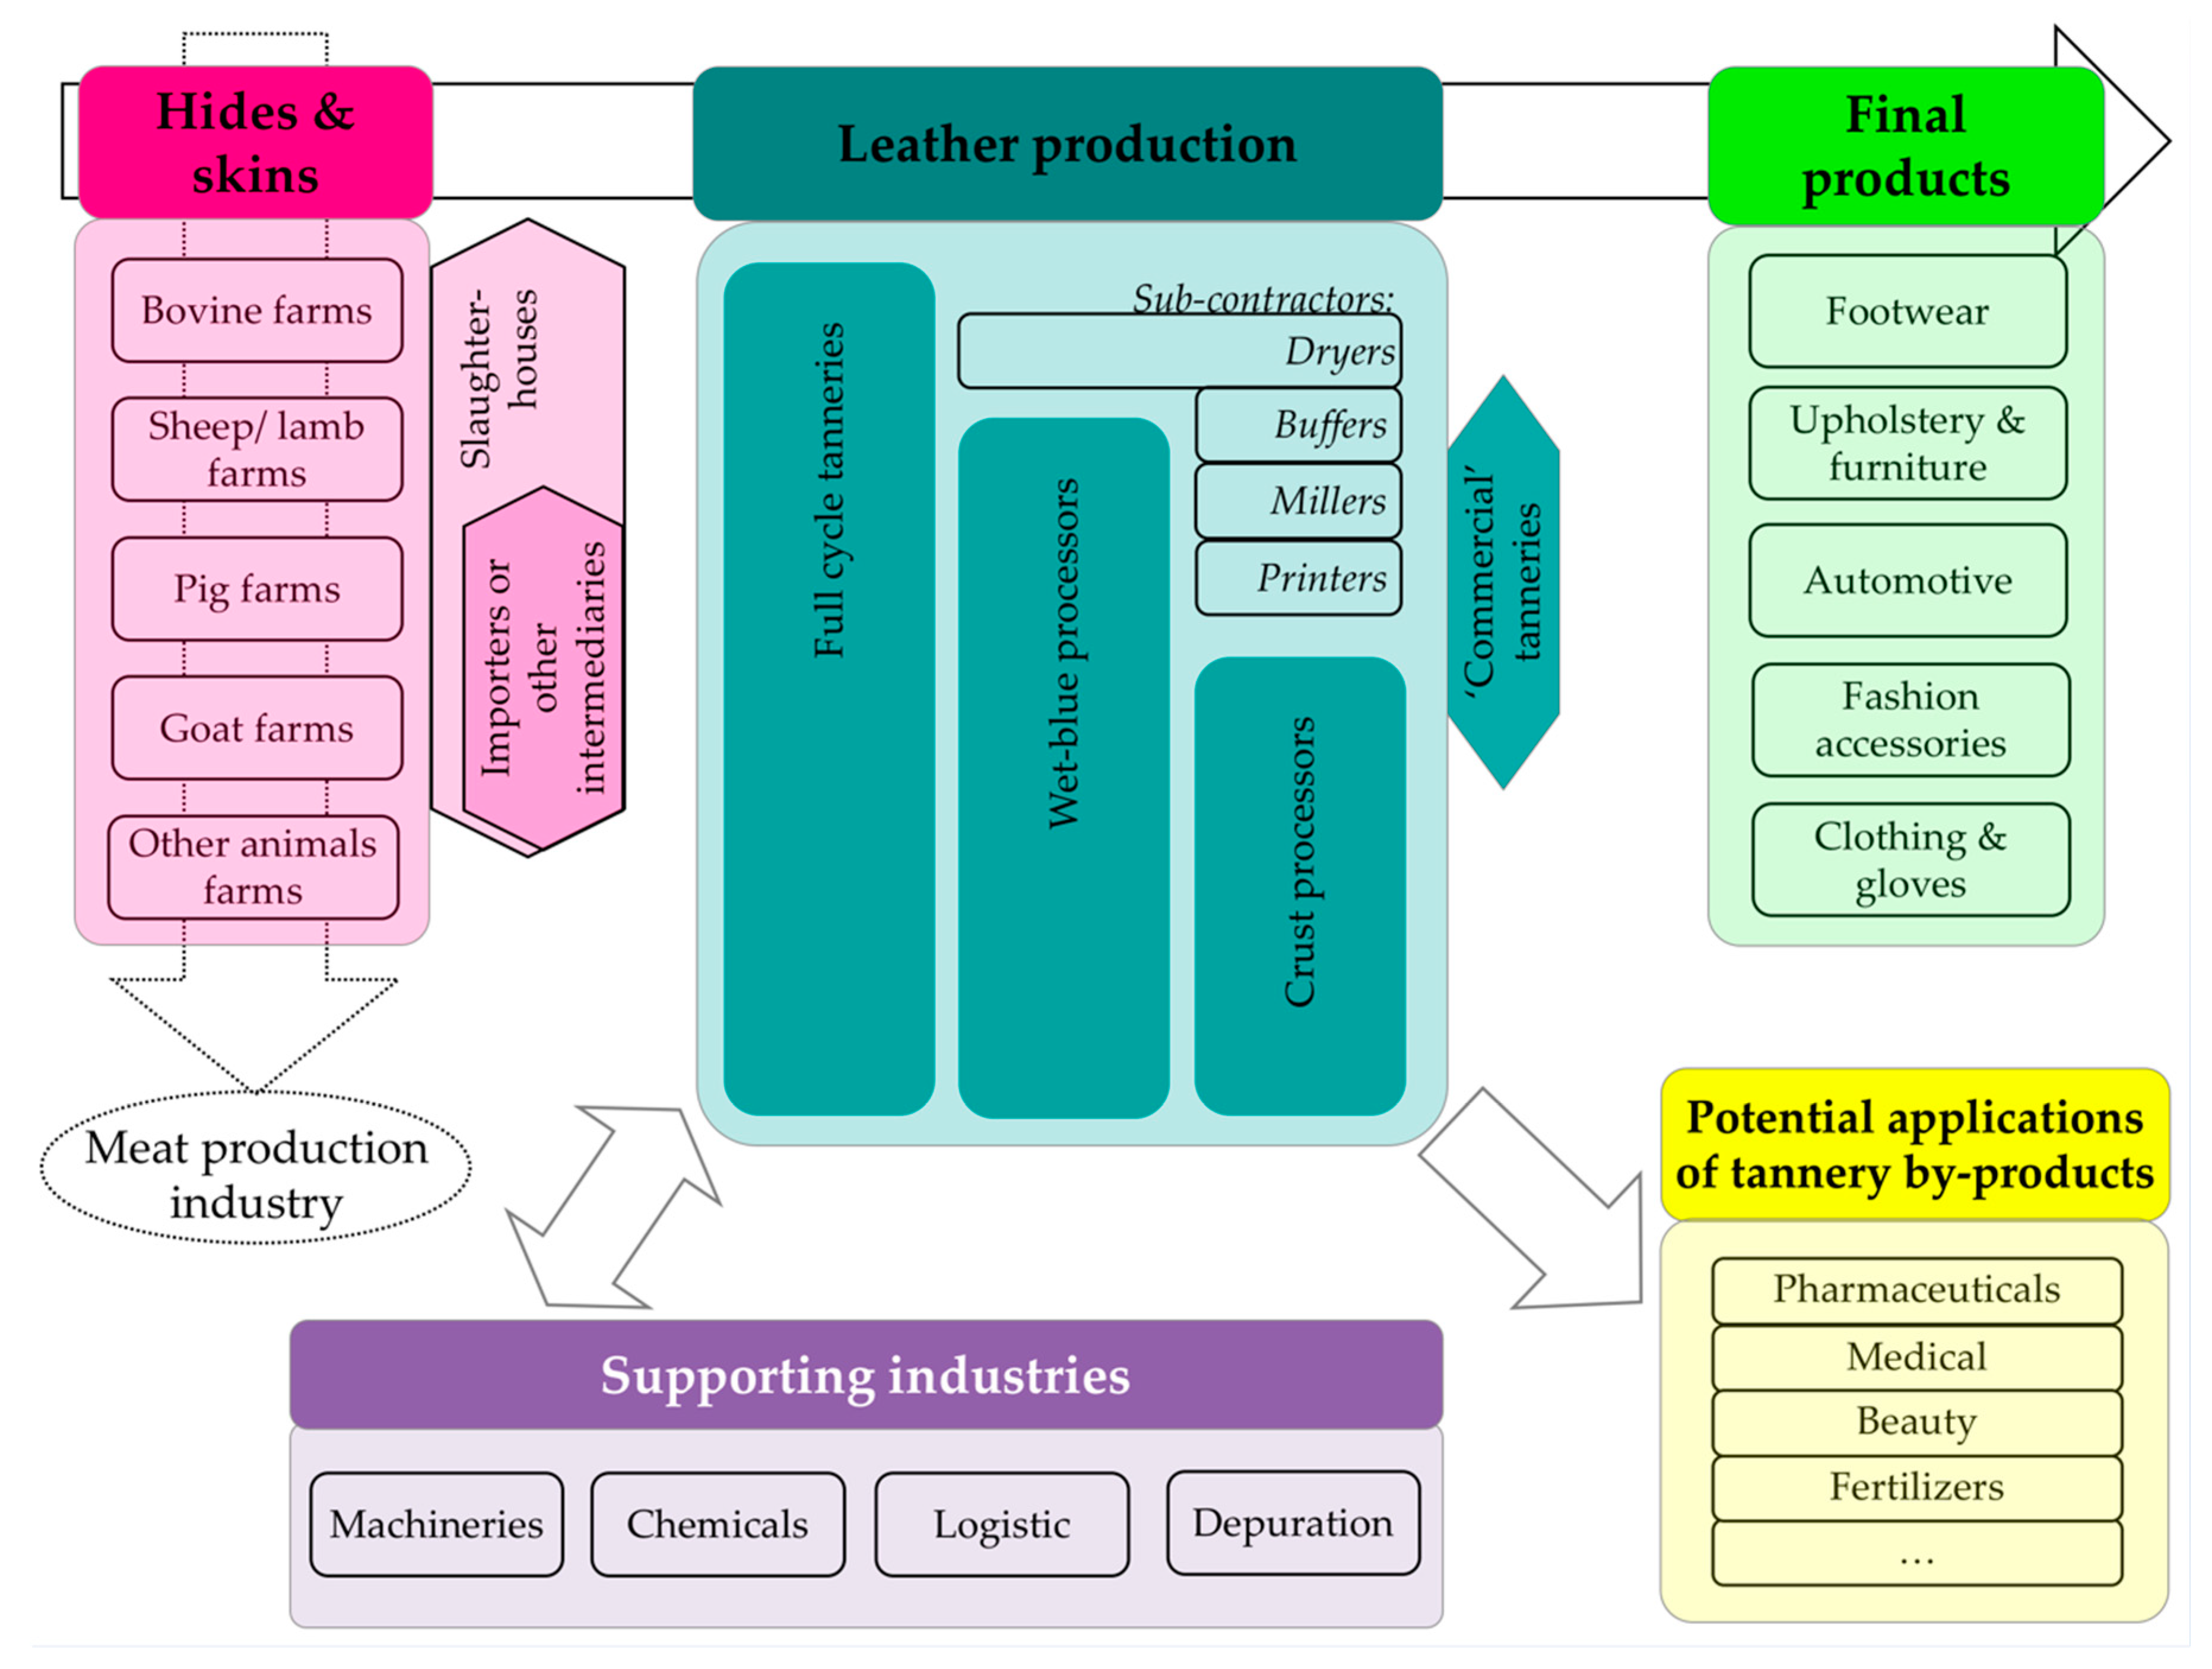 Sustainability | Free Full-Text | Environmental Upgrading and Suppliers' Agency in the Leather Value Chain